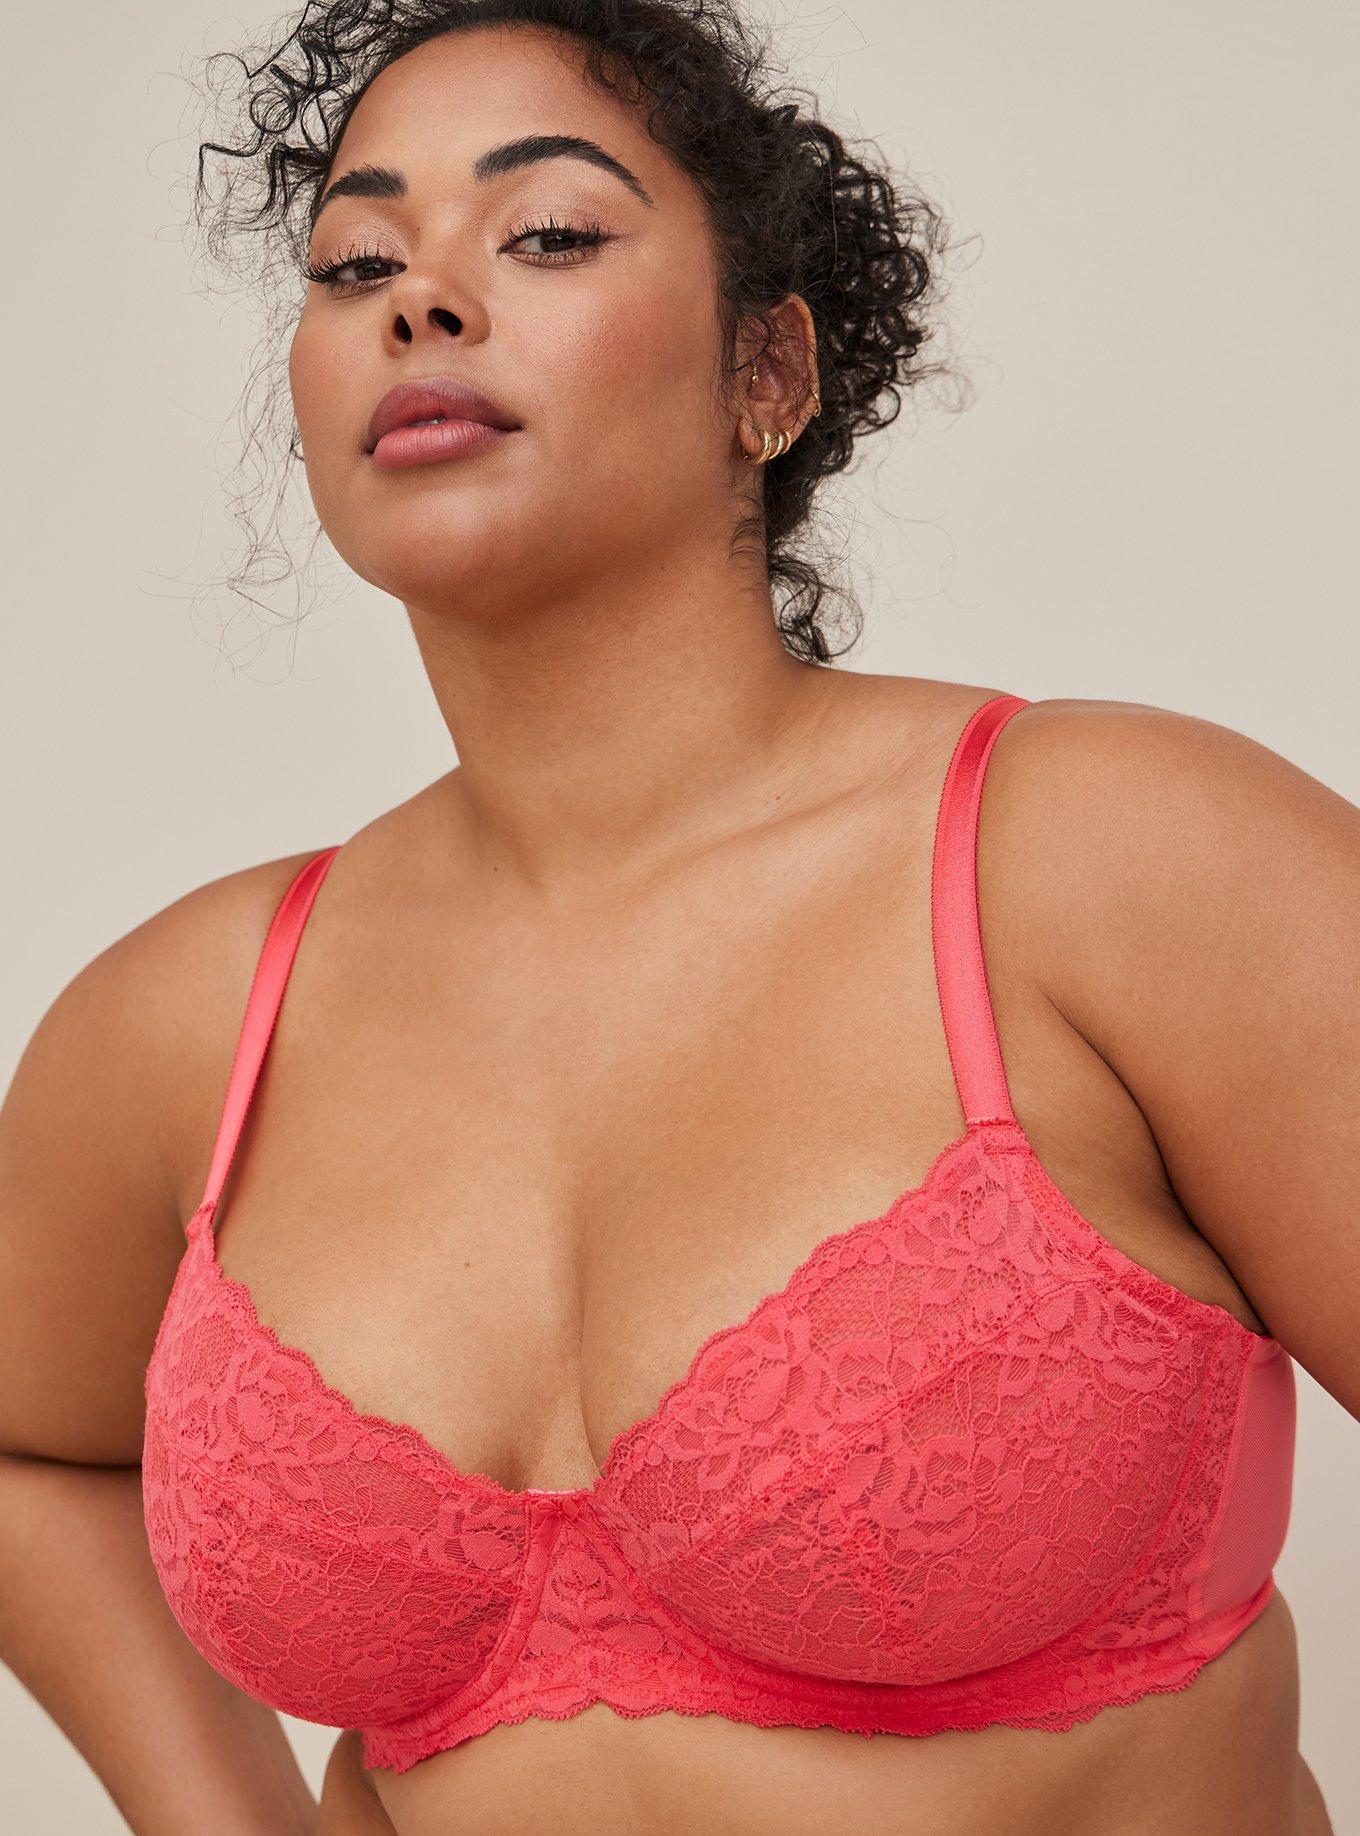 Plus Size - Full-Coverage Unlined Two Tone Lace Ballet Back Bra - Torrid